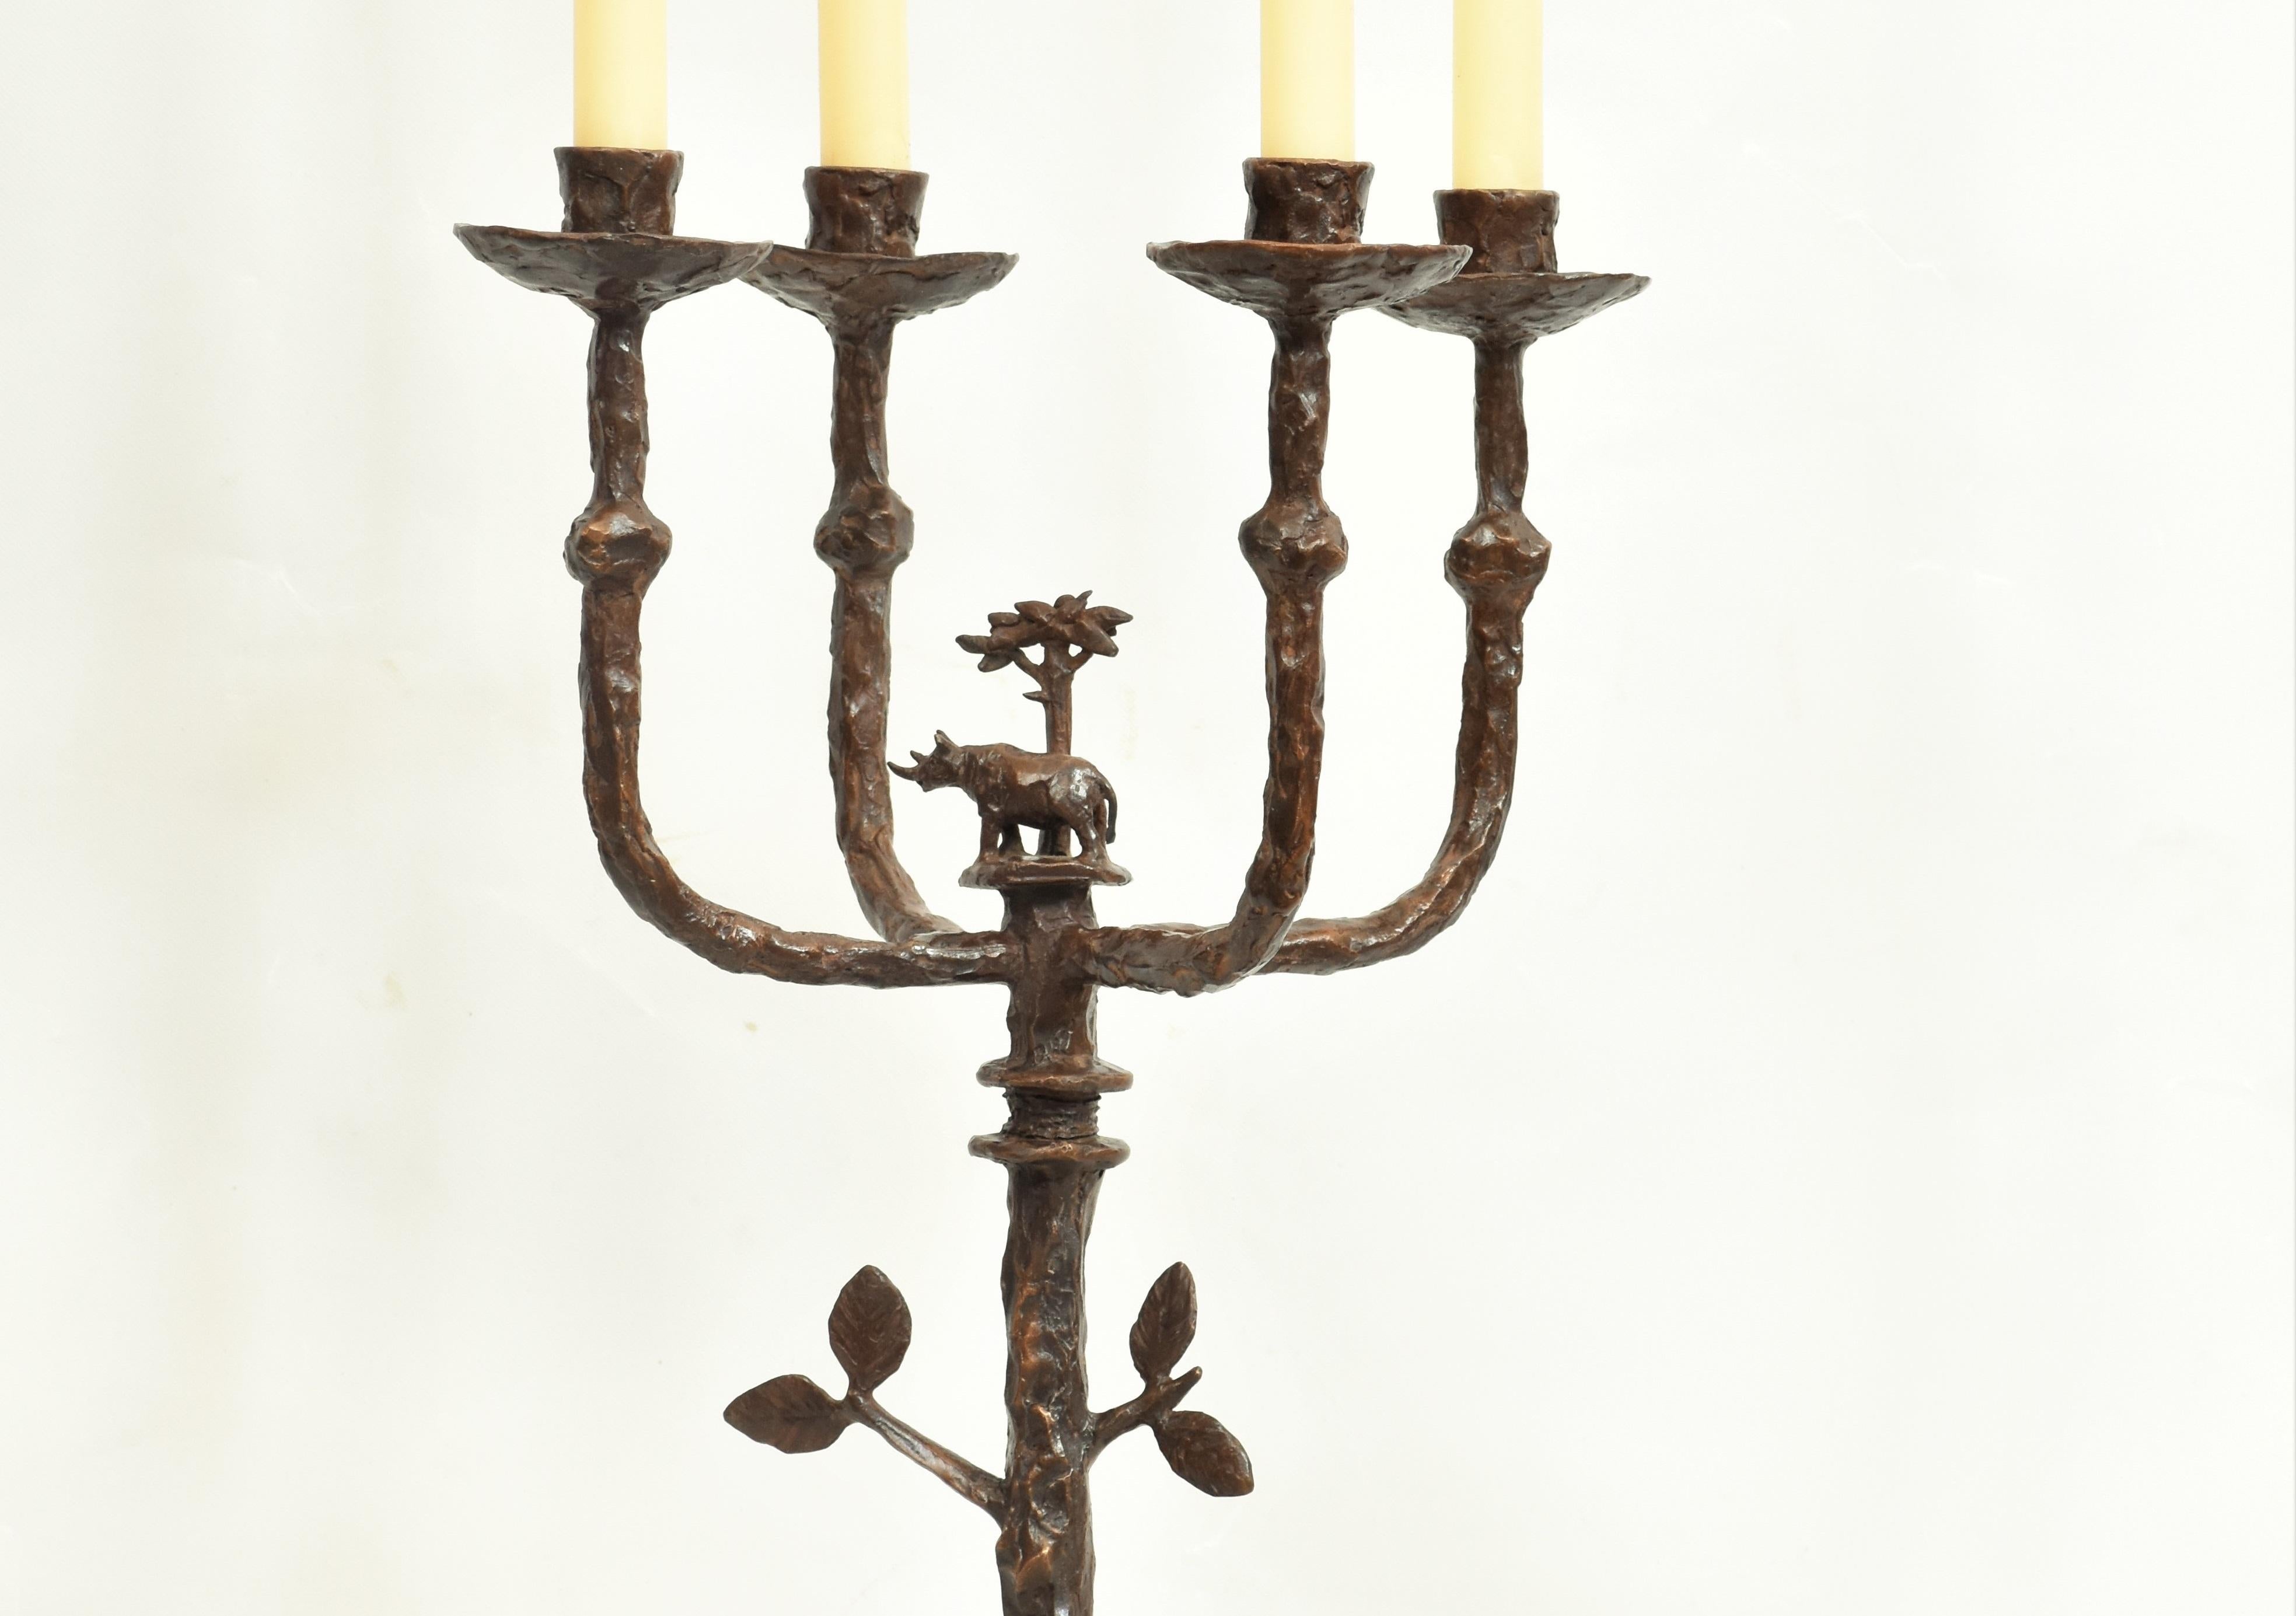 Rhino Candelabra, Height 47 cm x Width 26 cm, Candlestick in cast bronze with brown patina with small Rhino, Acacia tree and leaf motif. Candles not provided. Similar bronze single and double candle sticks in different sizes & motifs on request.